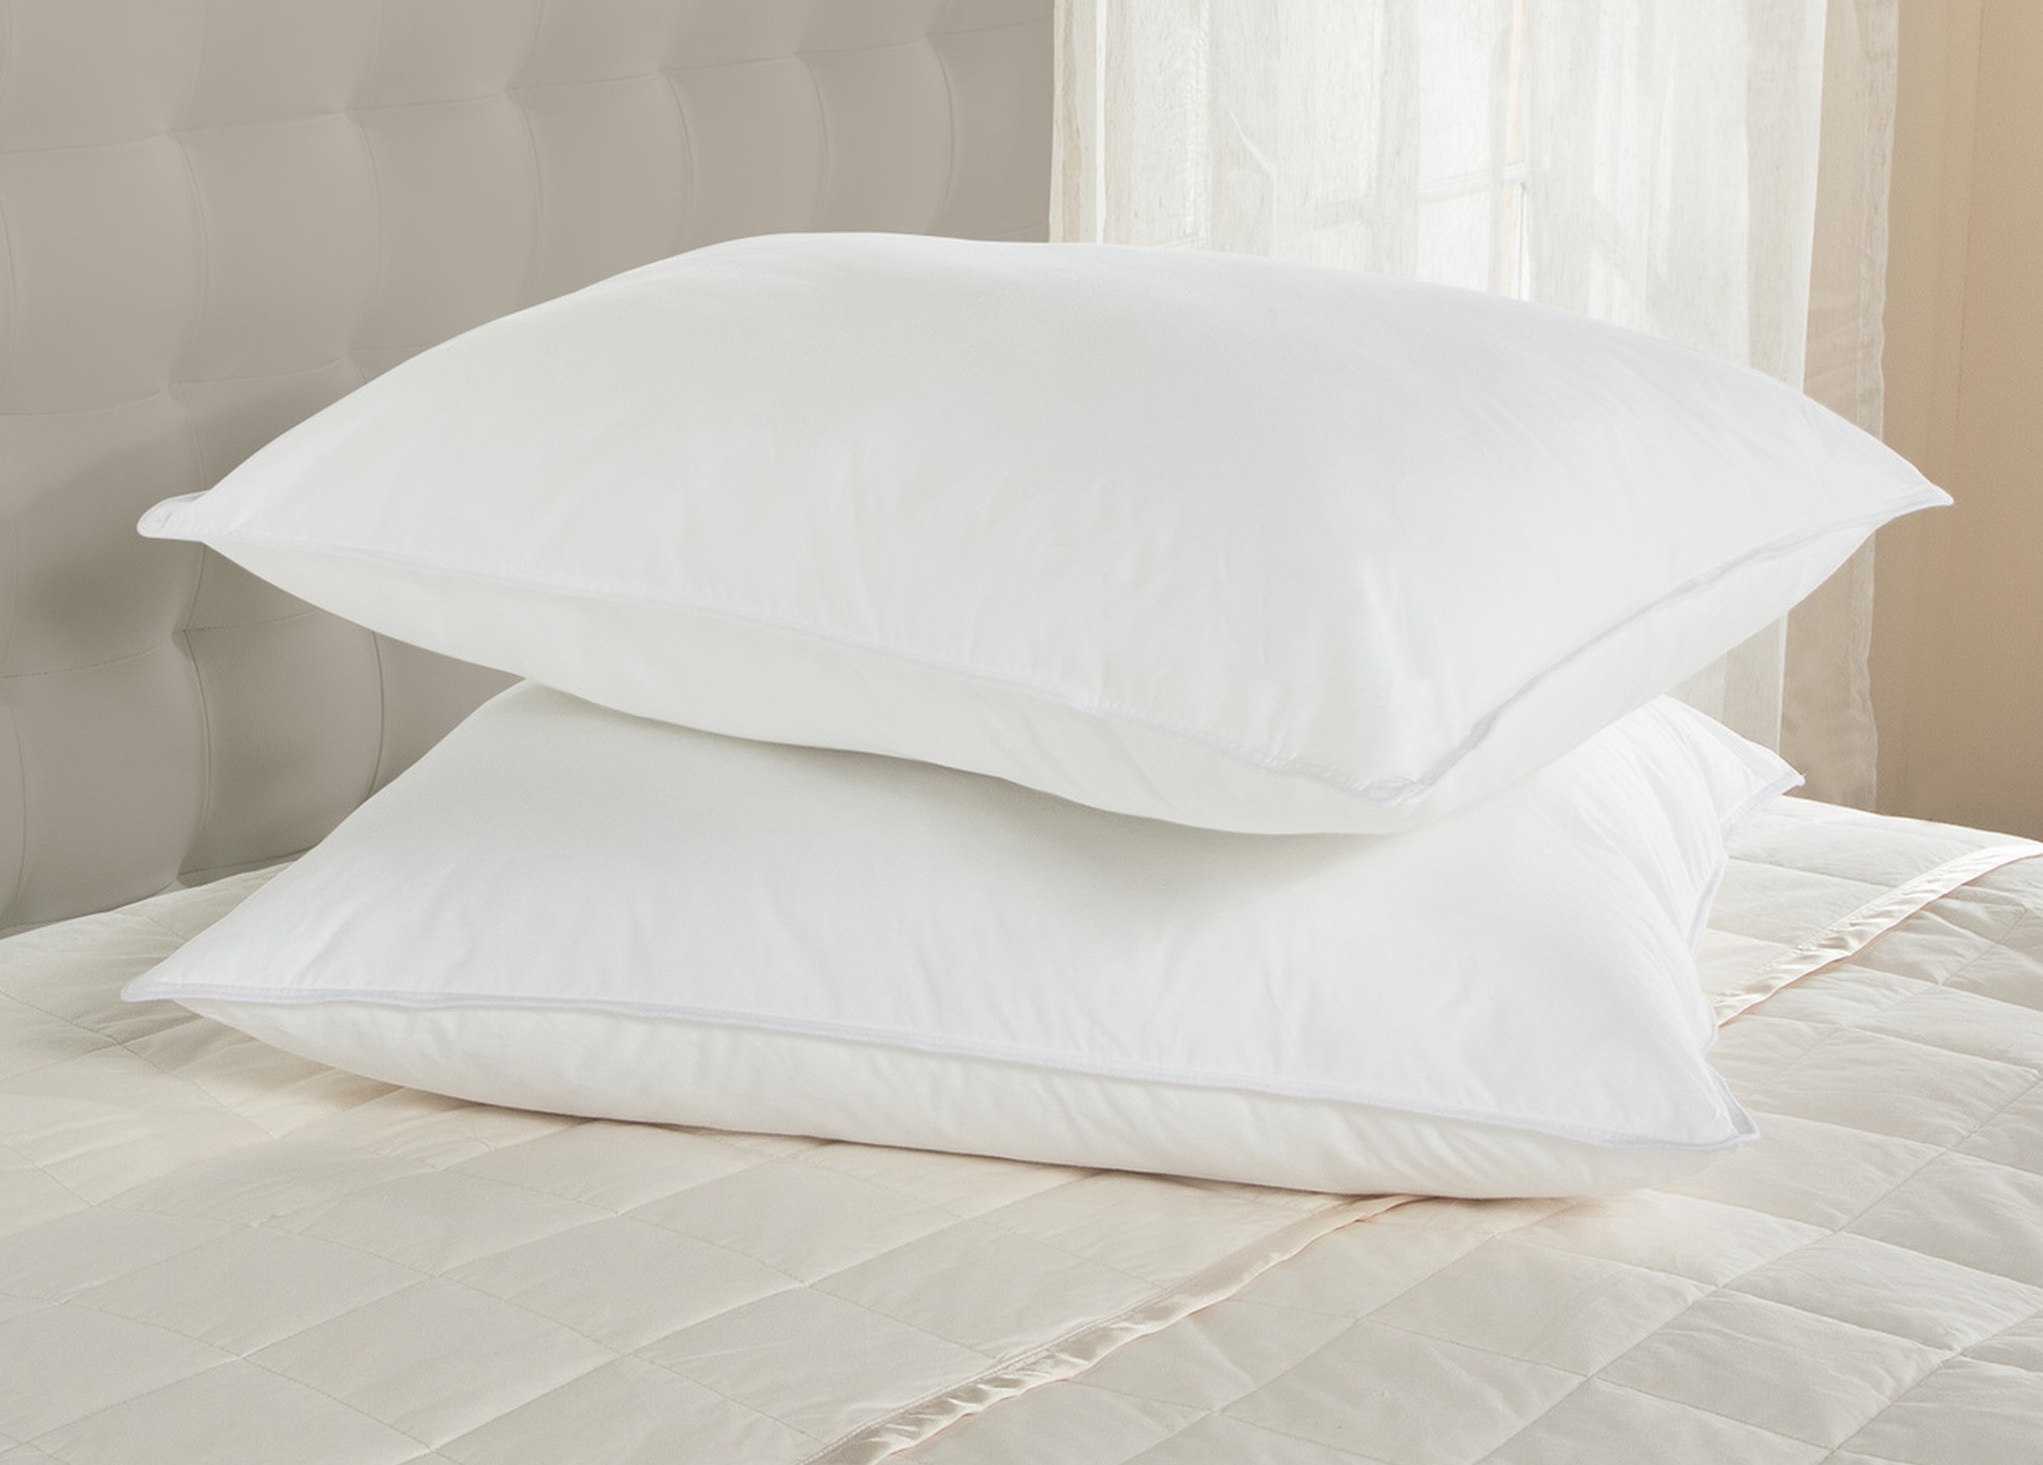 a pair of Downlite 50/50 pillows on a bed